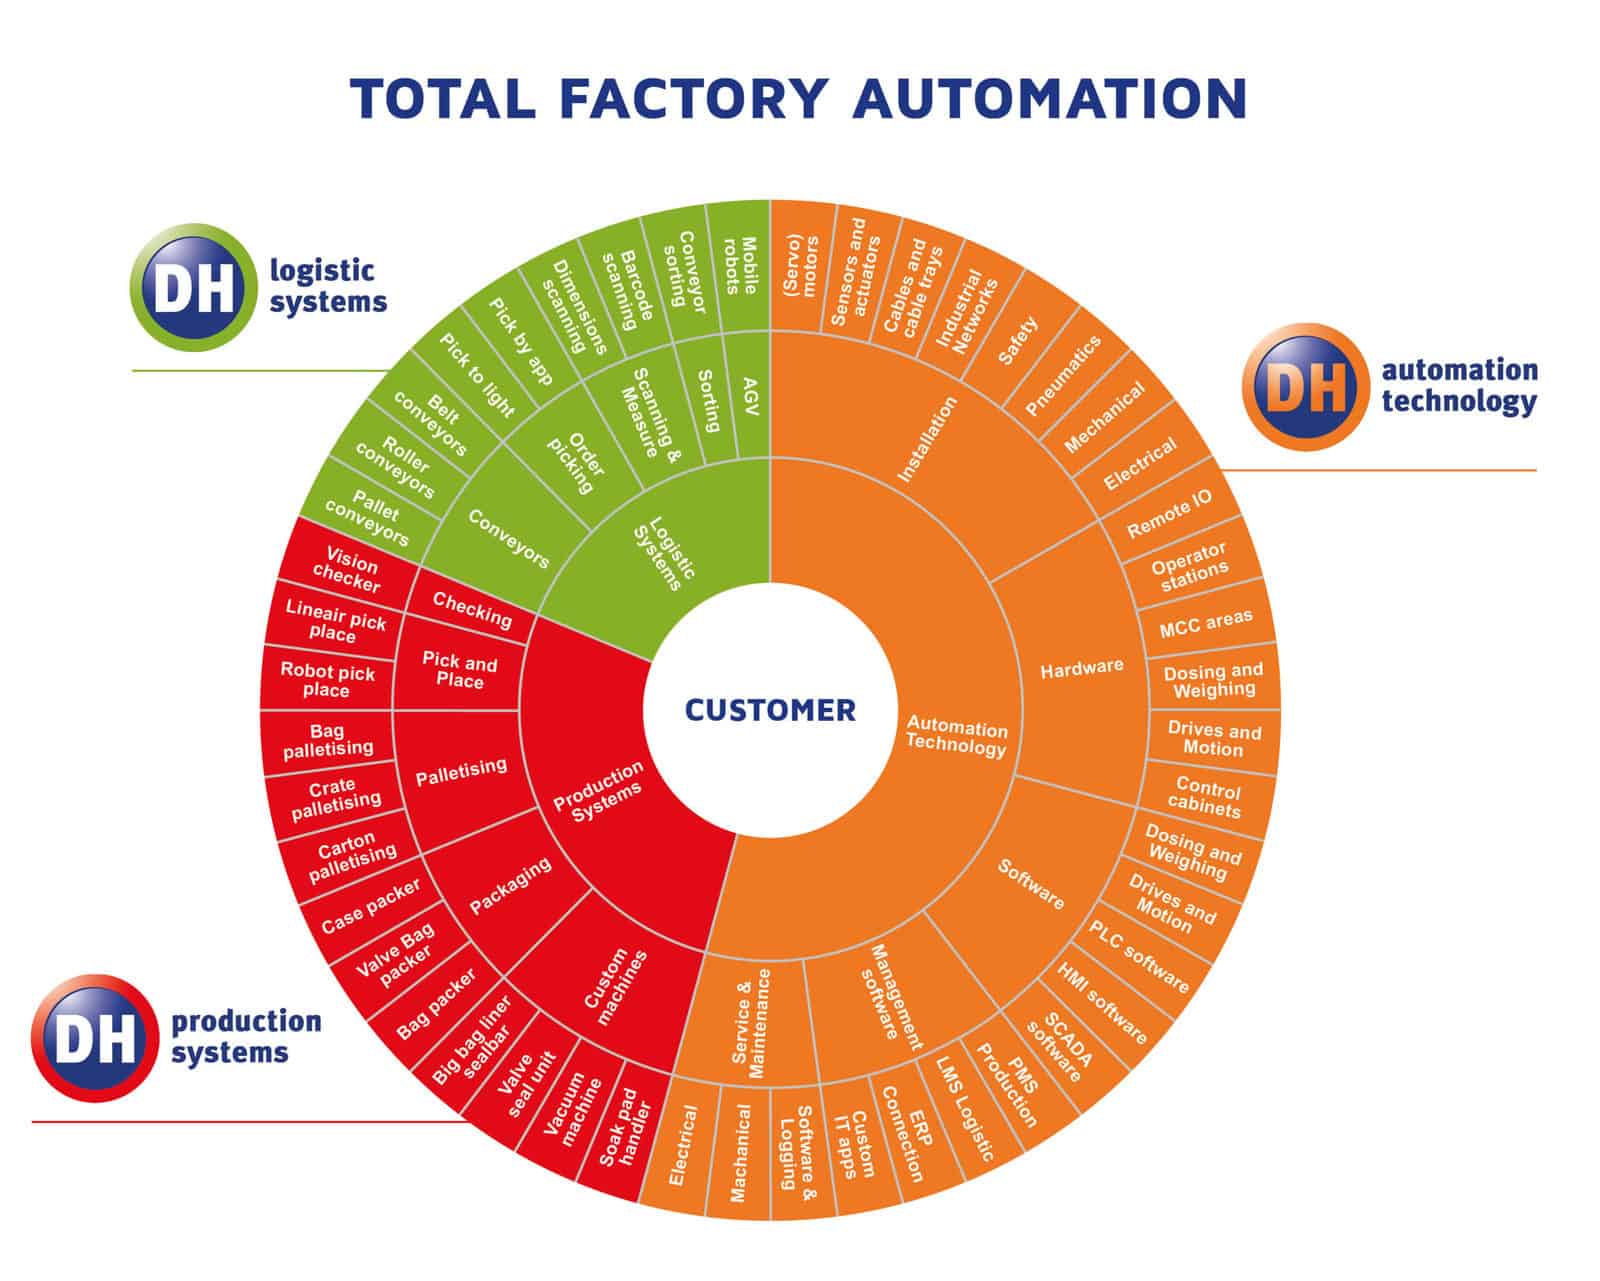 DH Total Factory Automation, 1 automatisering van ERP tot Sensor